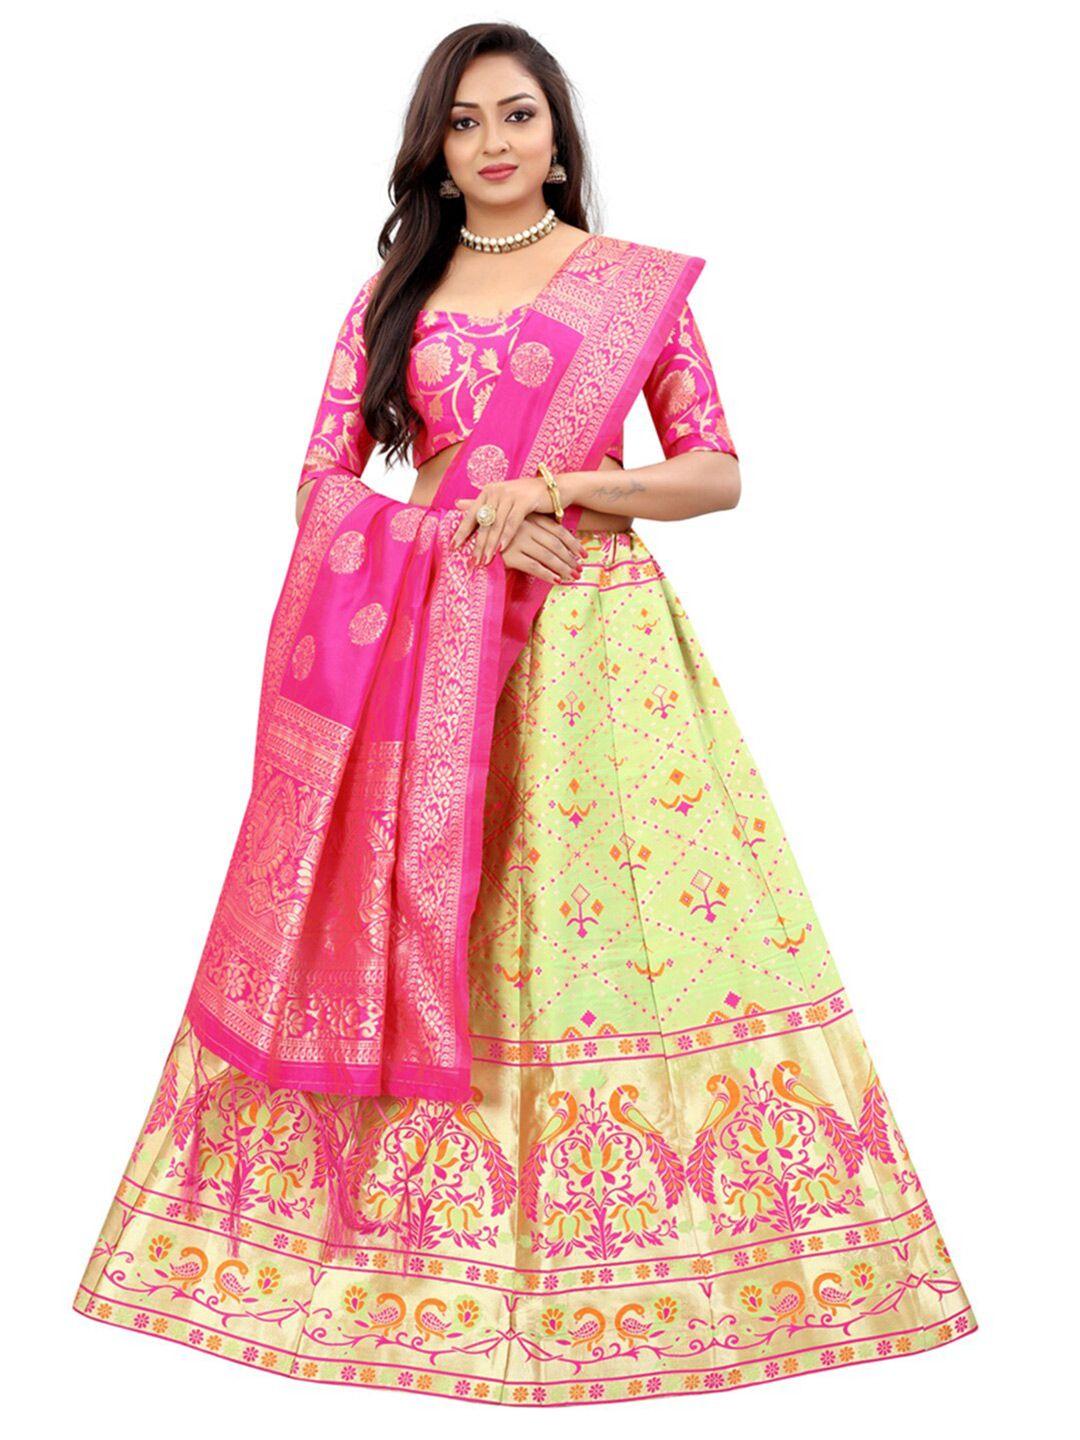 Xenilla Green & Pink Embroidered Semi-Stitched Lehenga & Blouse With Dupatta